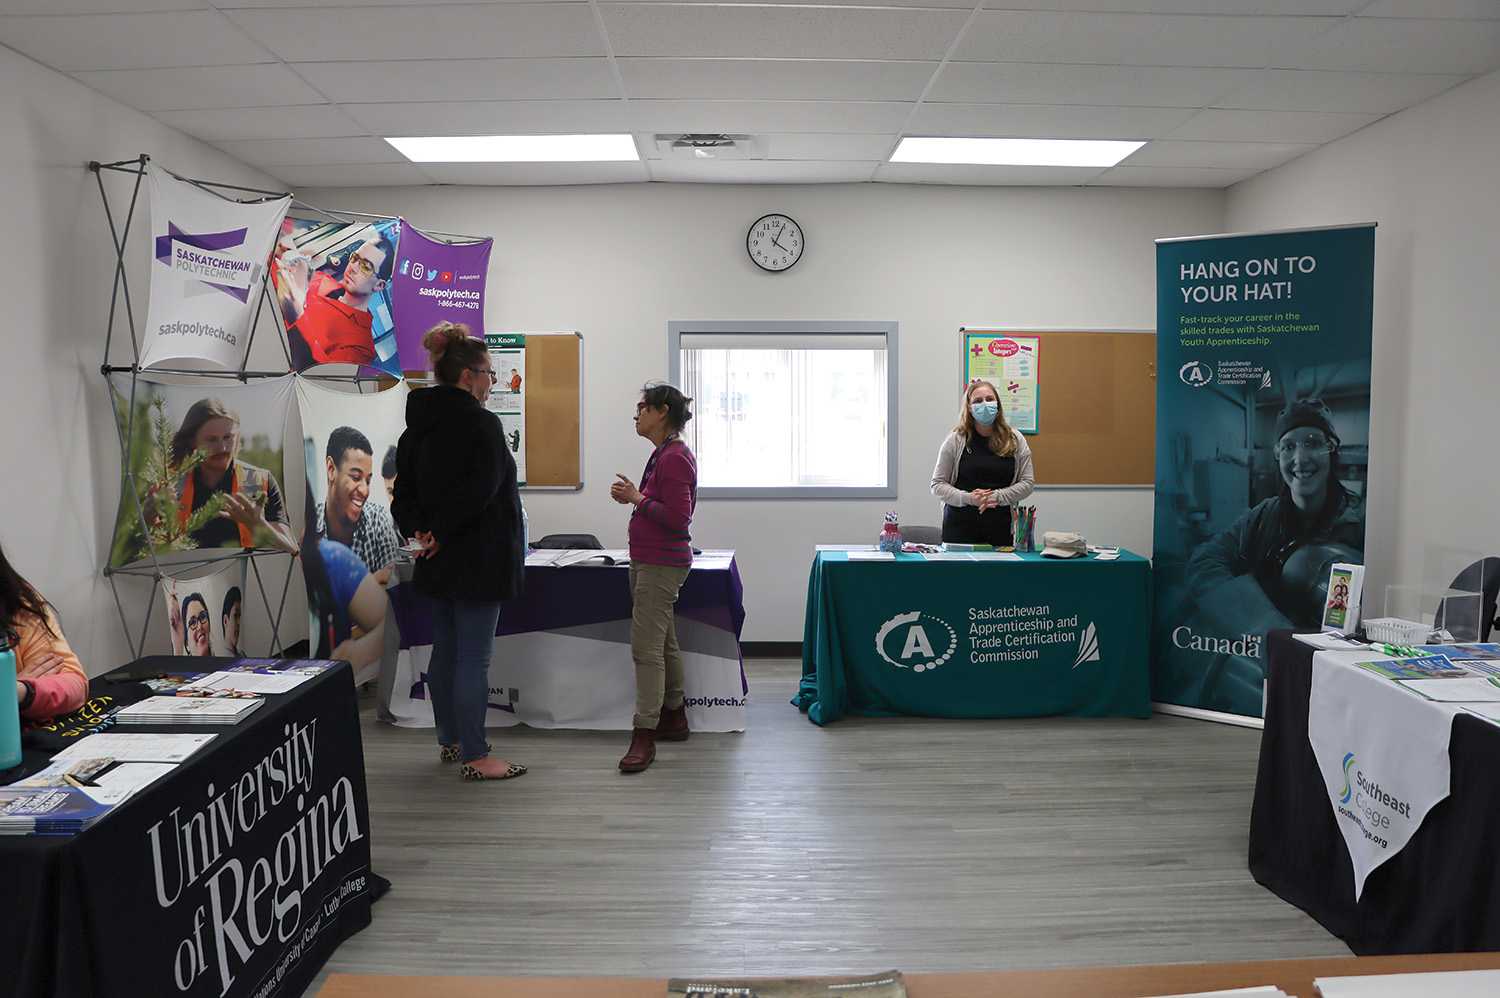 At the Southeast College Open House in Moosomin, colleges and universities were showing the variety of different courses they offer to the community in town.